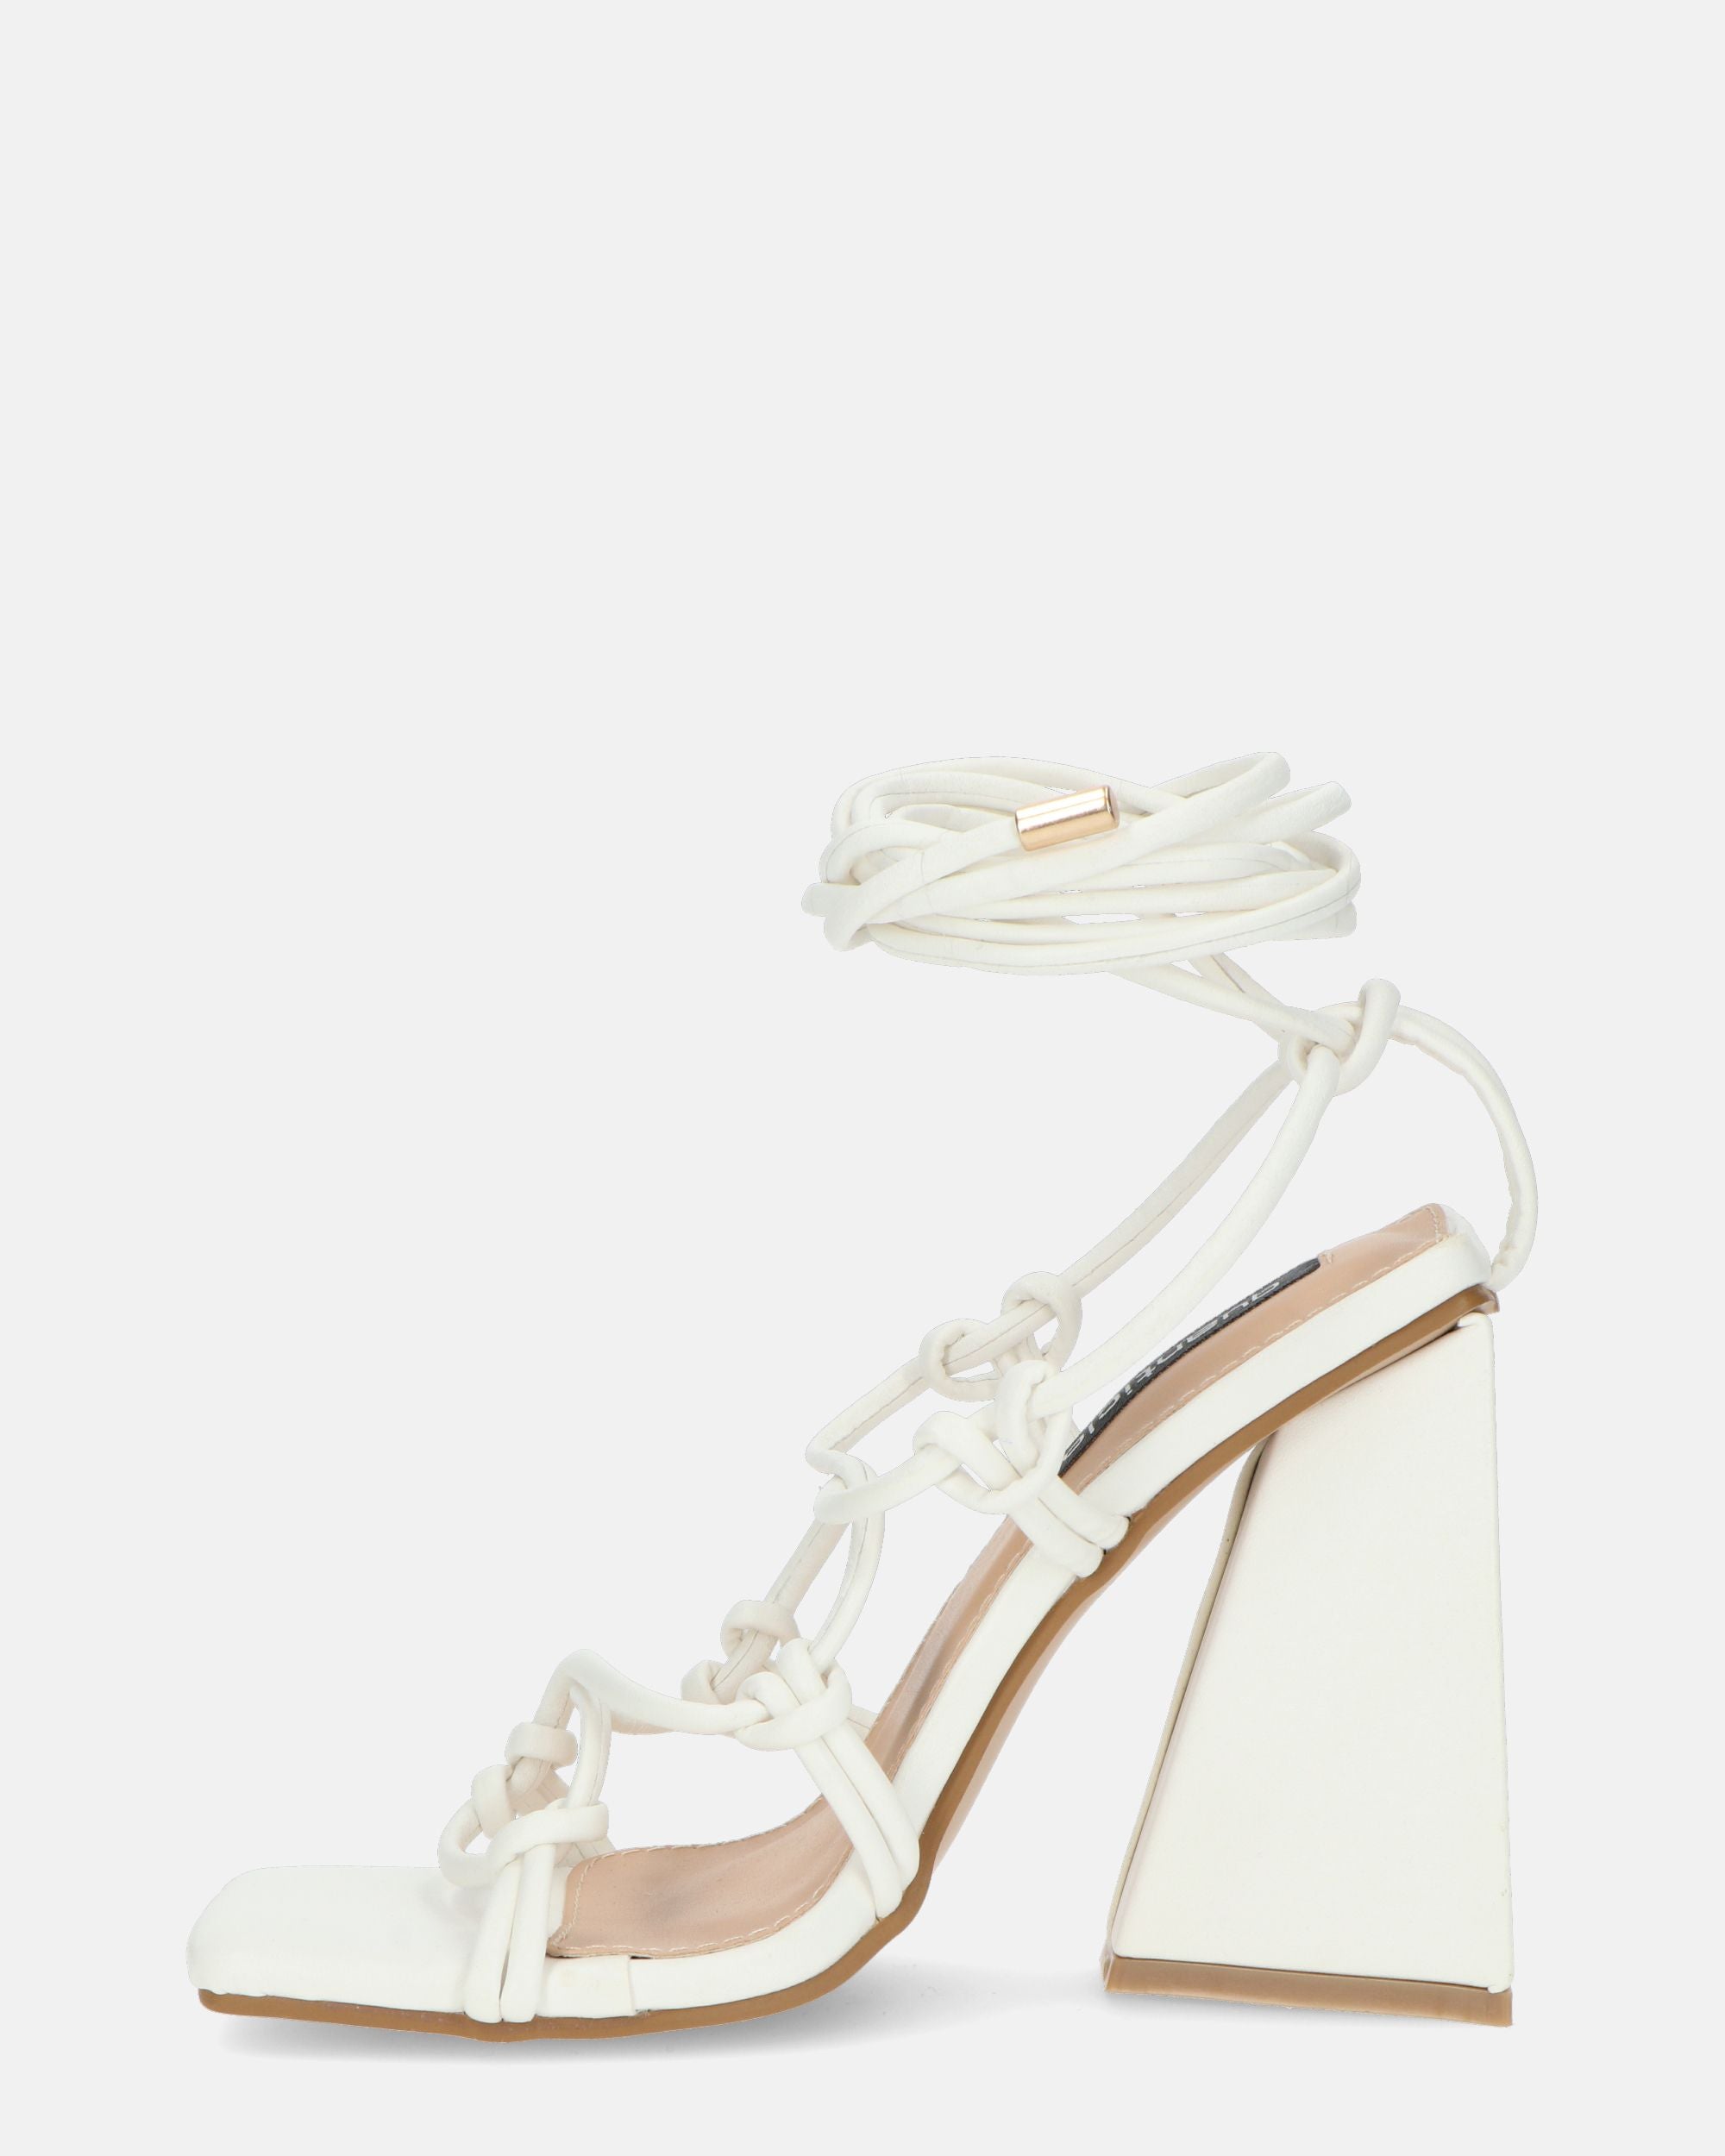 NURAY - high-heeled sandals in white eco-leather with laces